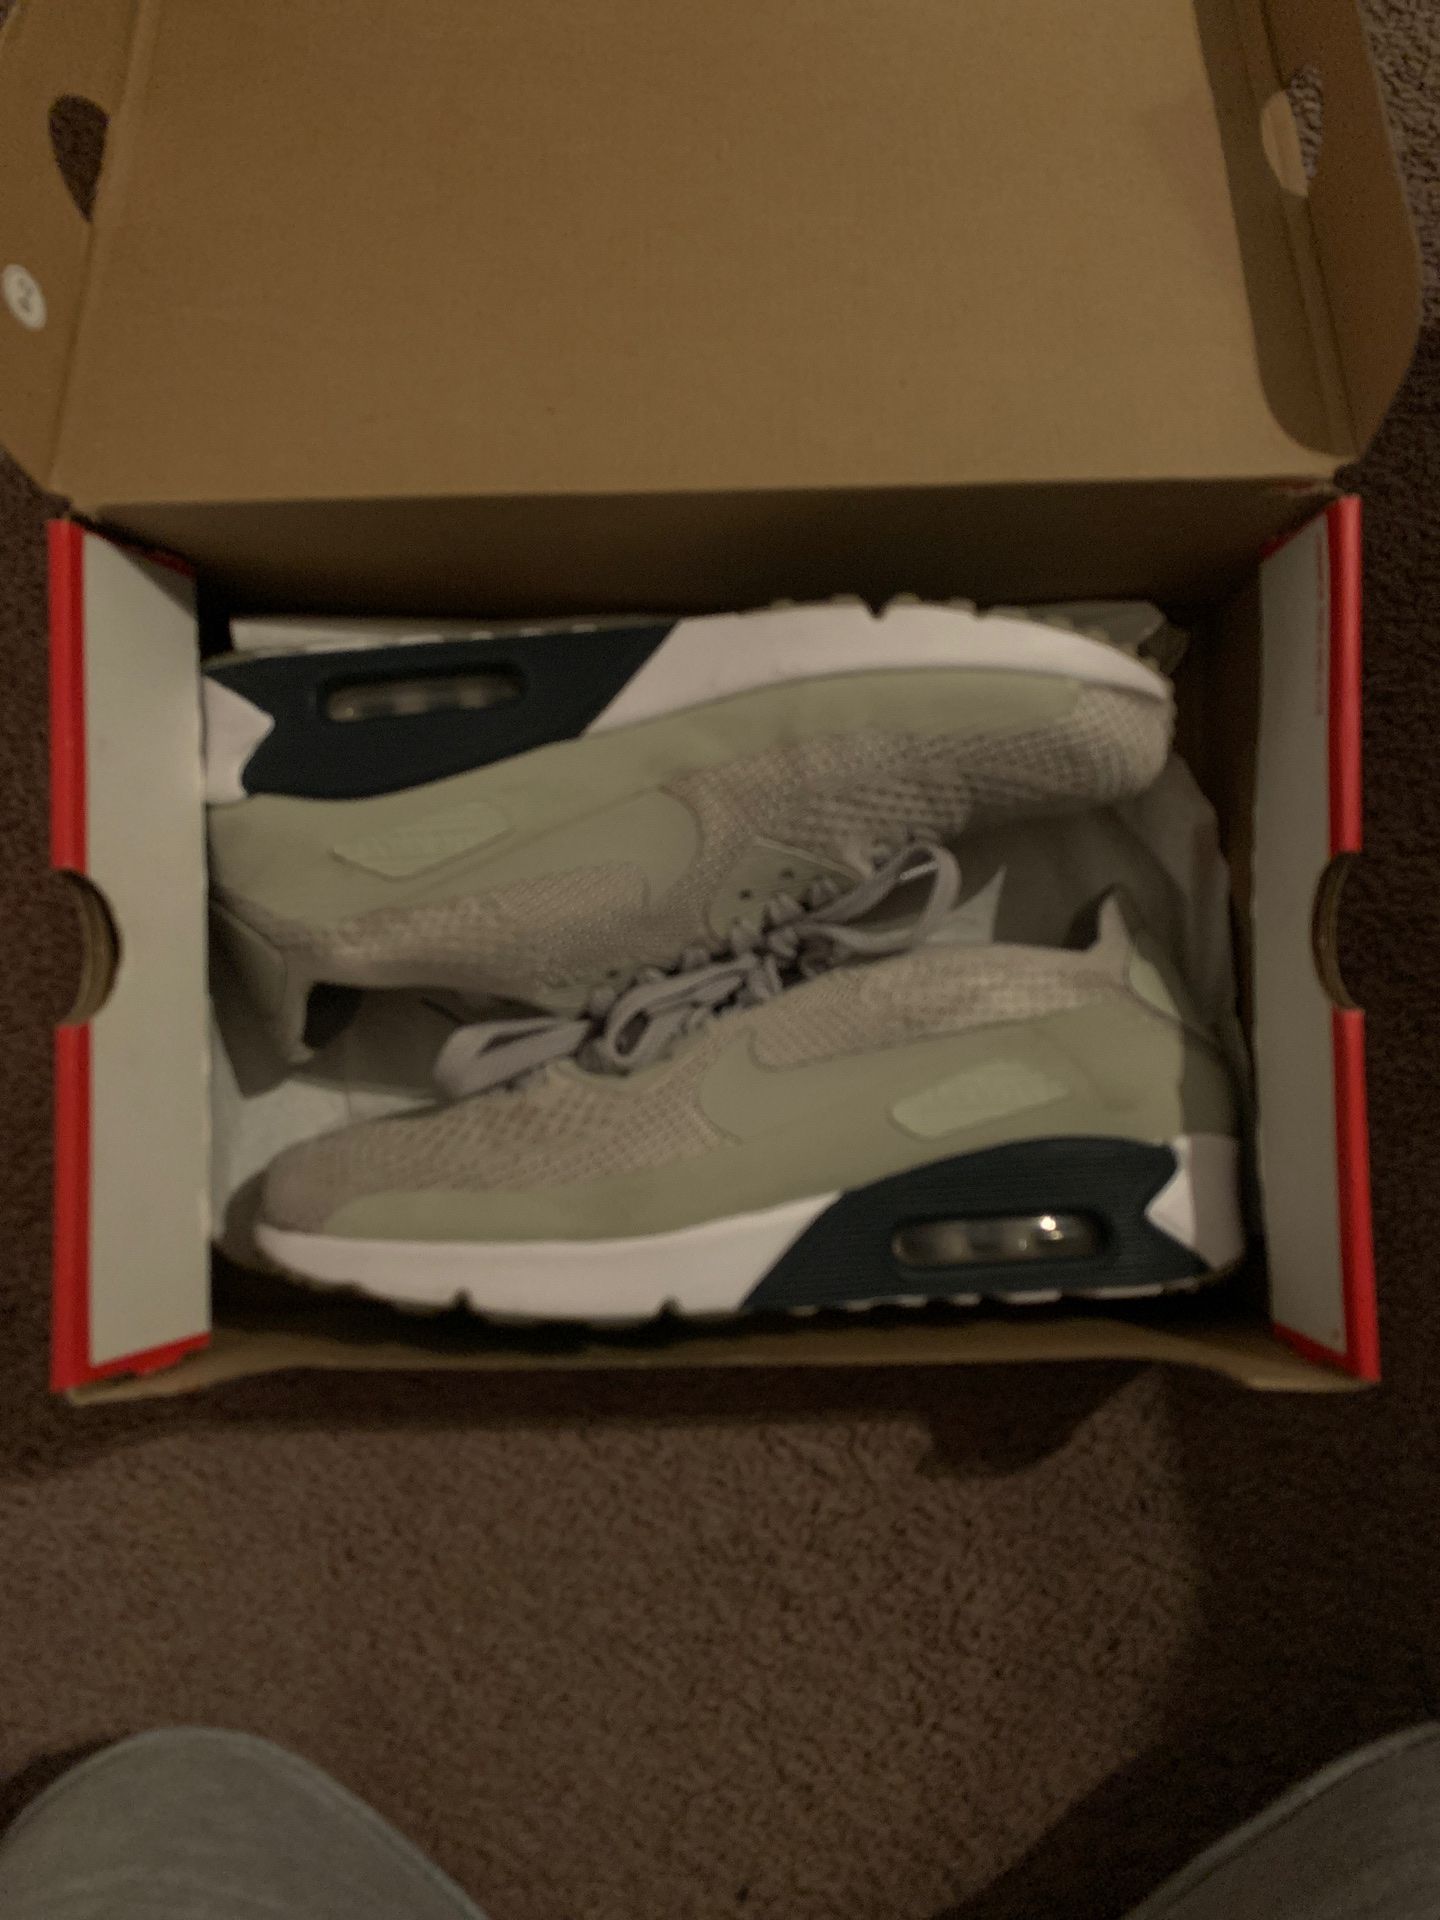 Nike Air Max 90 Ultra 2.0 Flyknit size 10.5 (Pale Grey)